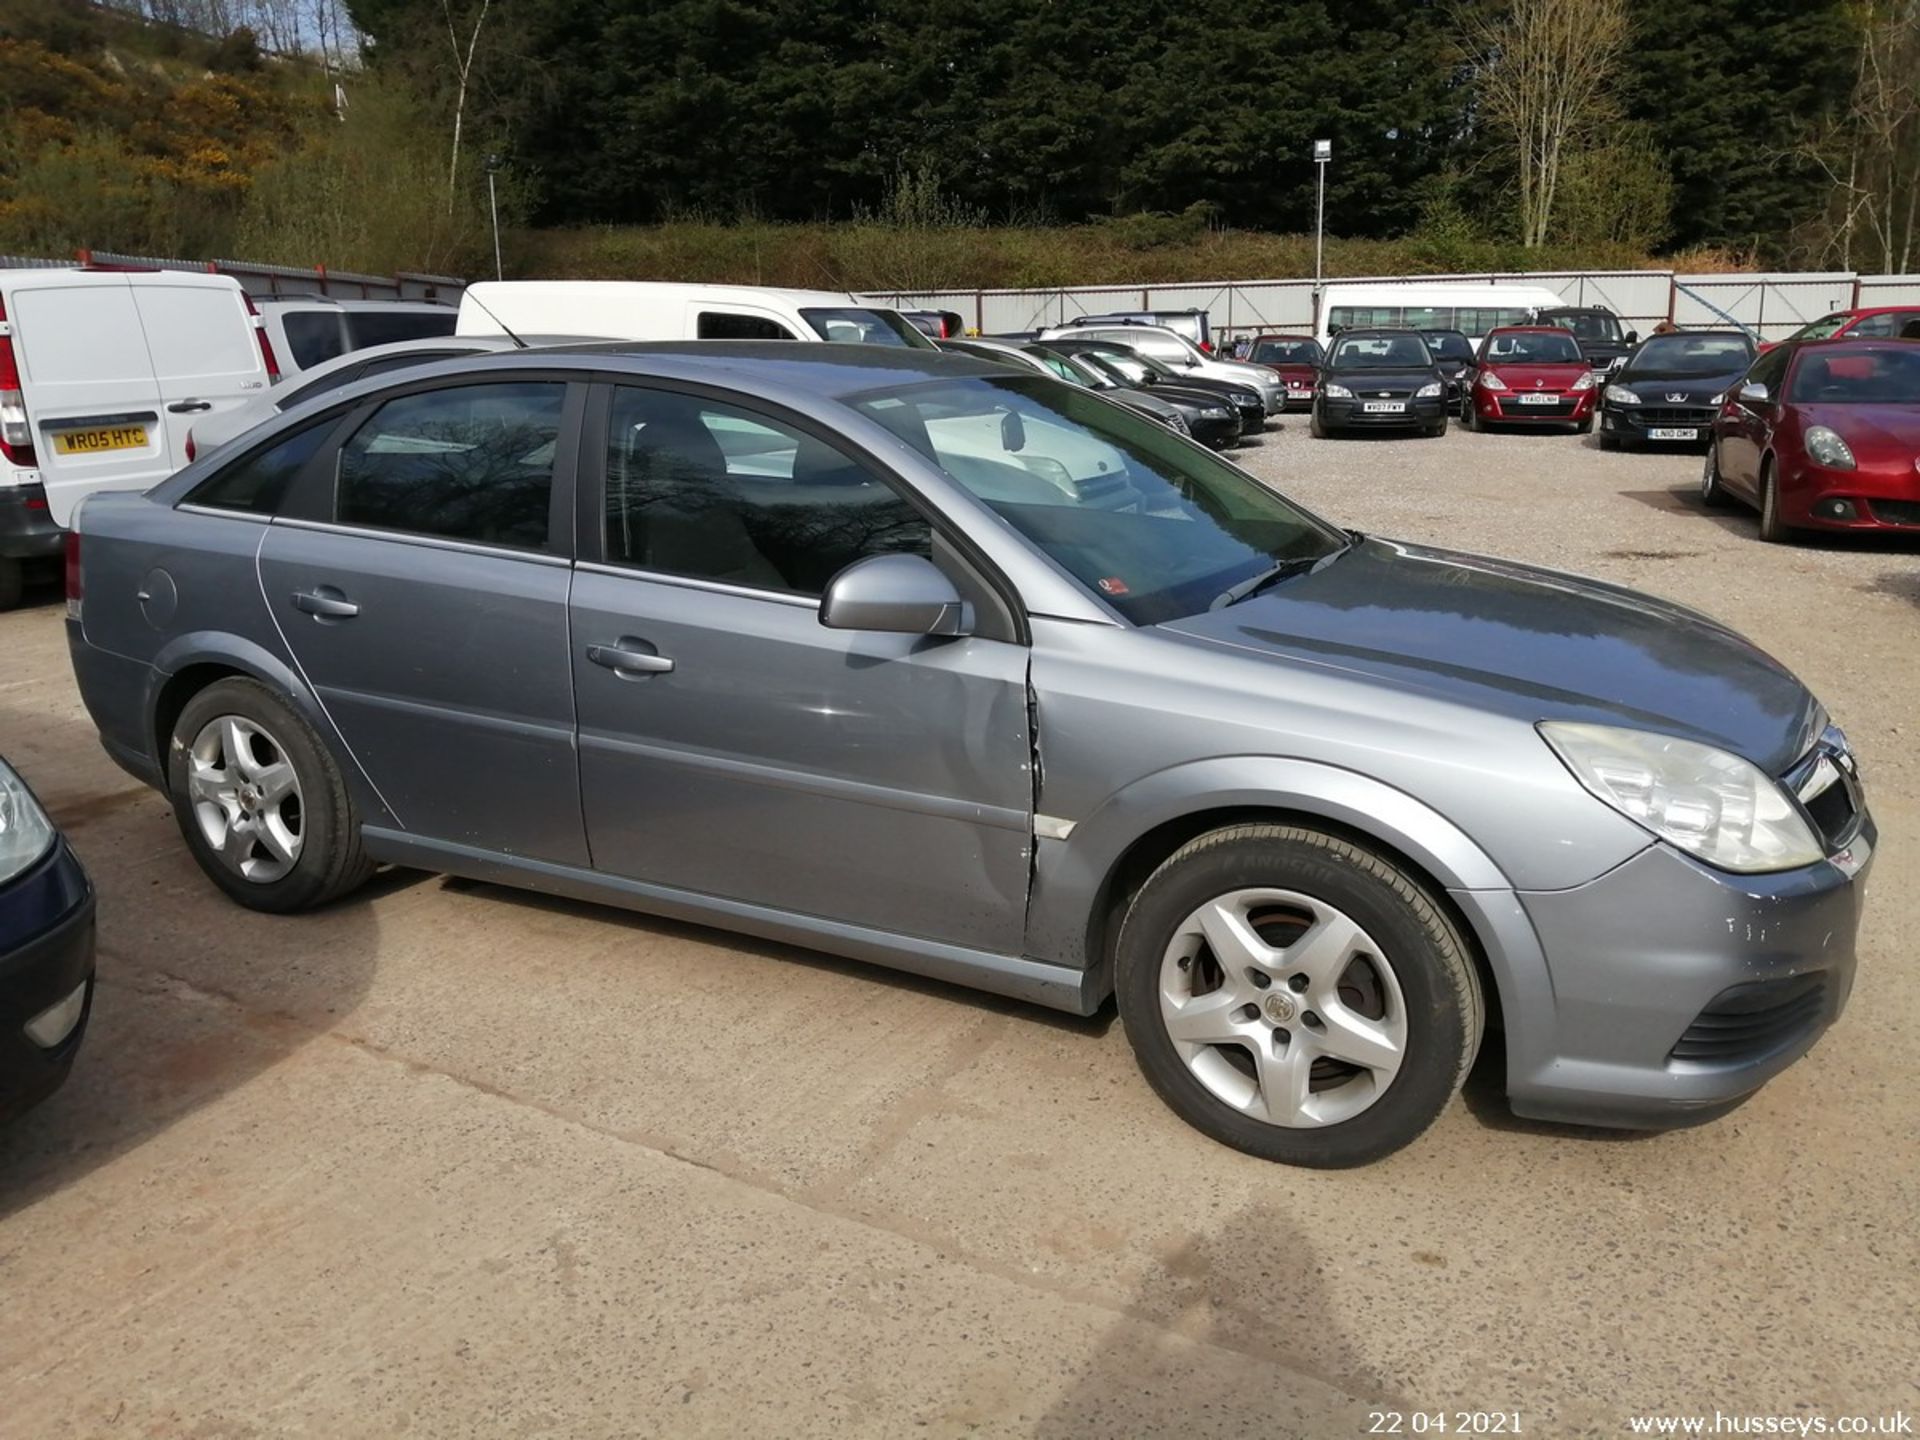 08/08 VAUXHALL VECTRA EXCLUSIV - 1796cc 5dr Hatchback (Silver) - Image 8 of 12